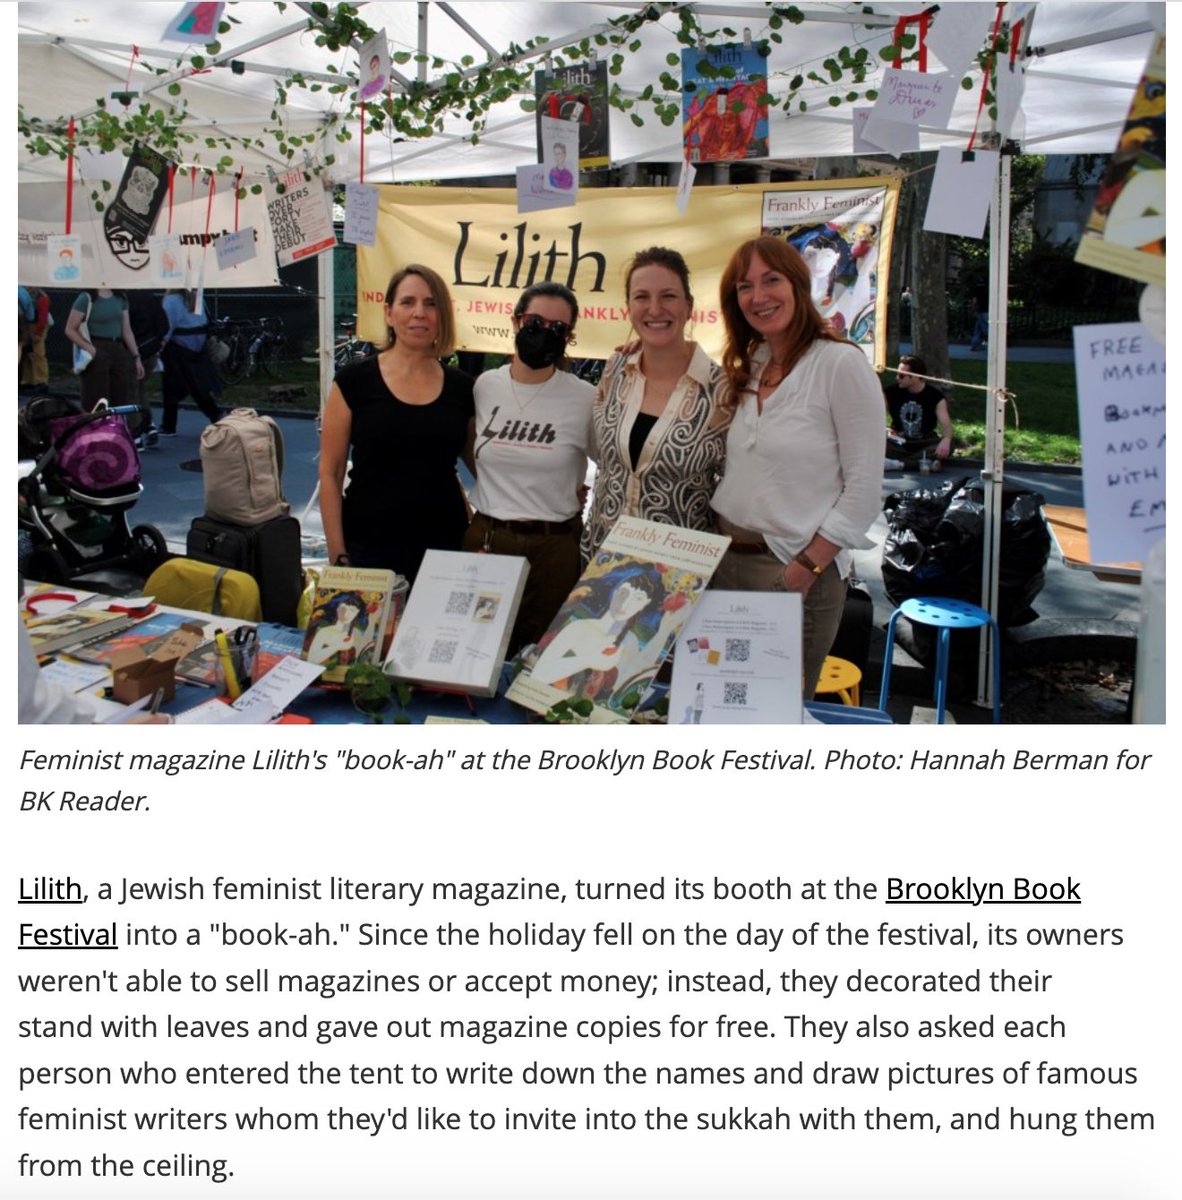 Love seeing Lilith's 'Bookah' at the @BKBF featured in @TheBKReader's article about sukkot!